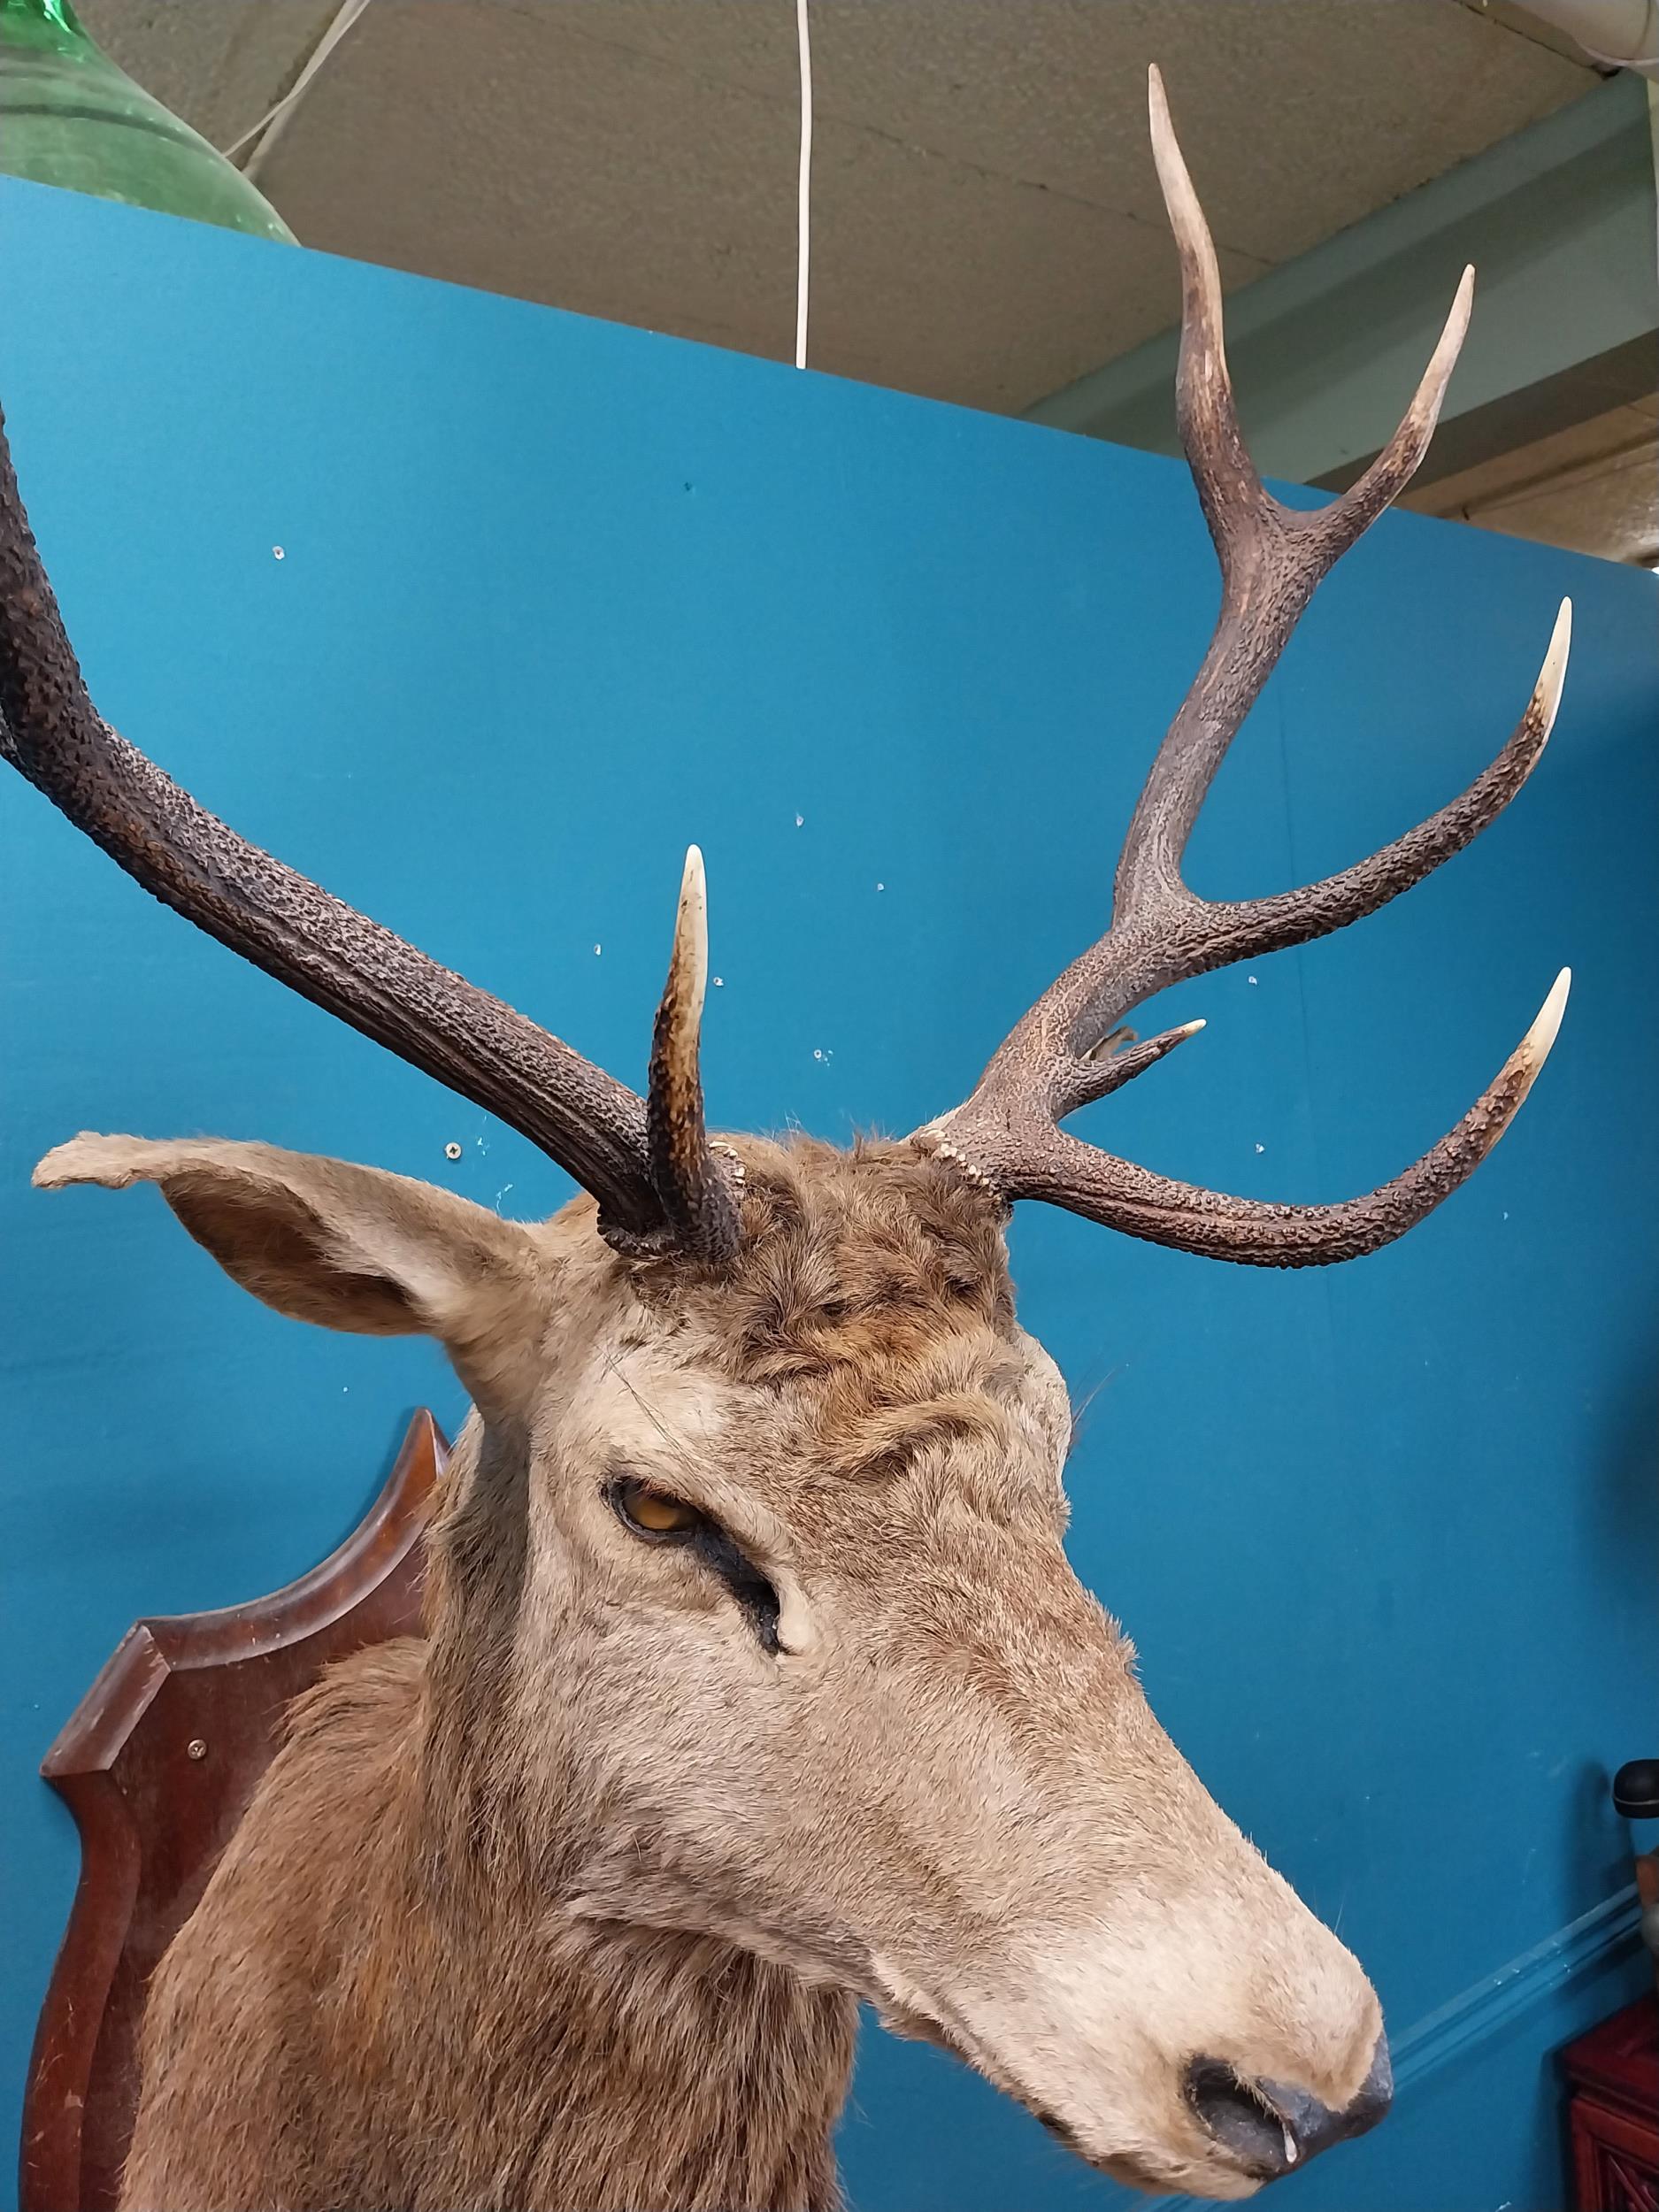 Early 20th C. taxidermy Stags head mounted on oak plaque {140 cm H x 100 cm W x 70 cm D}. - Image 3 of 3